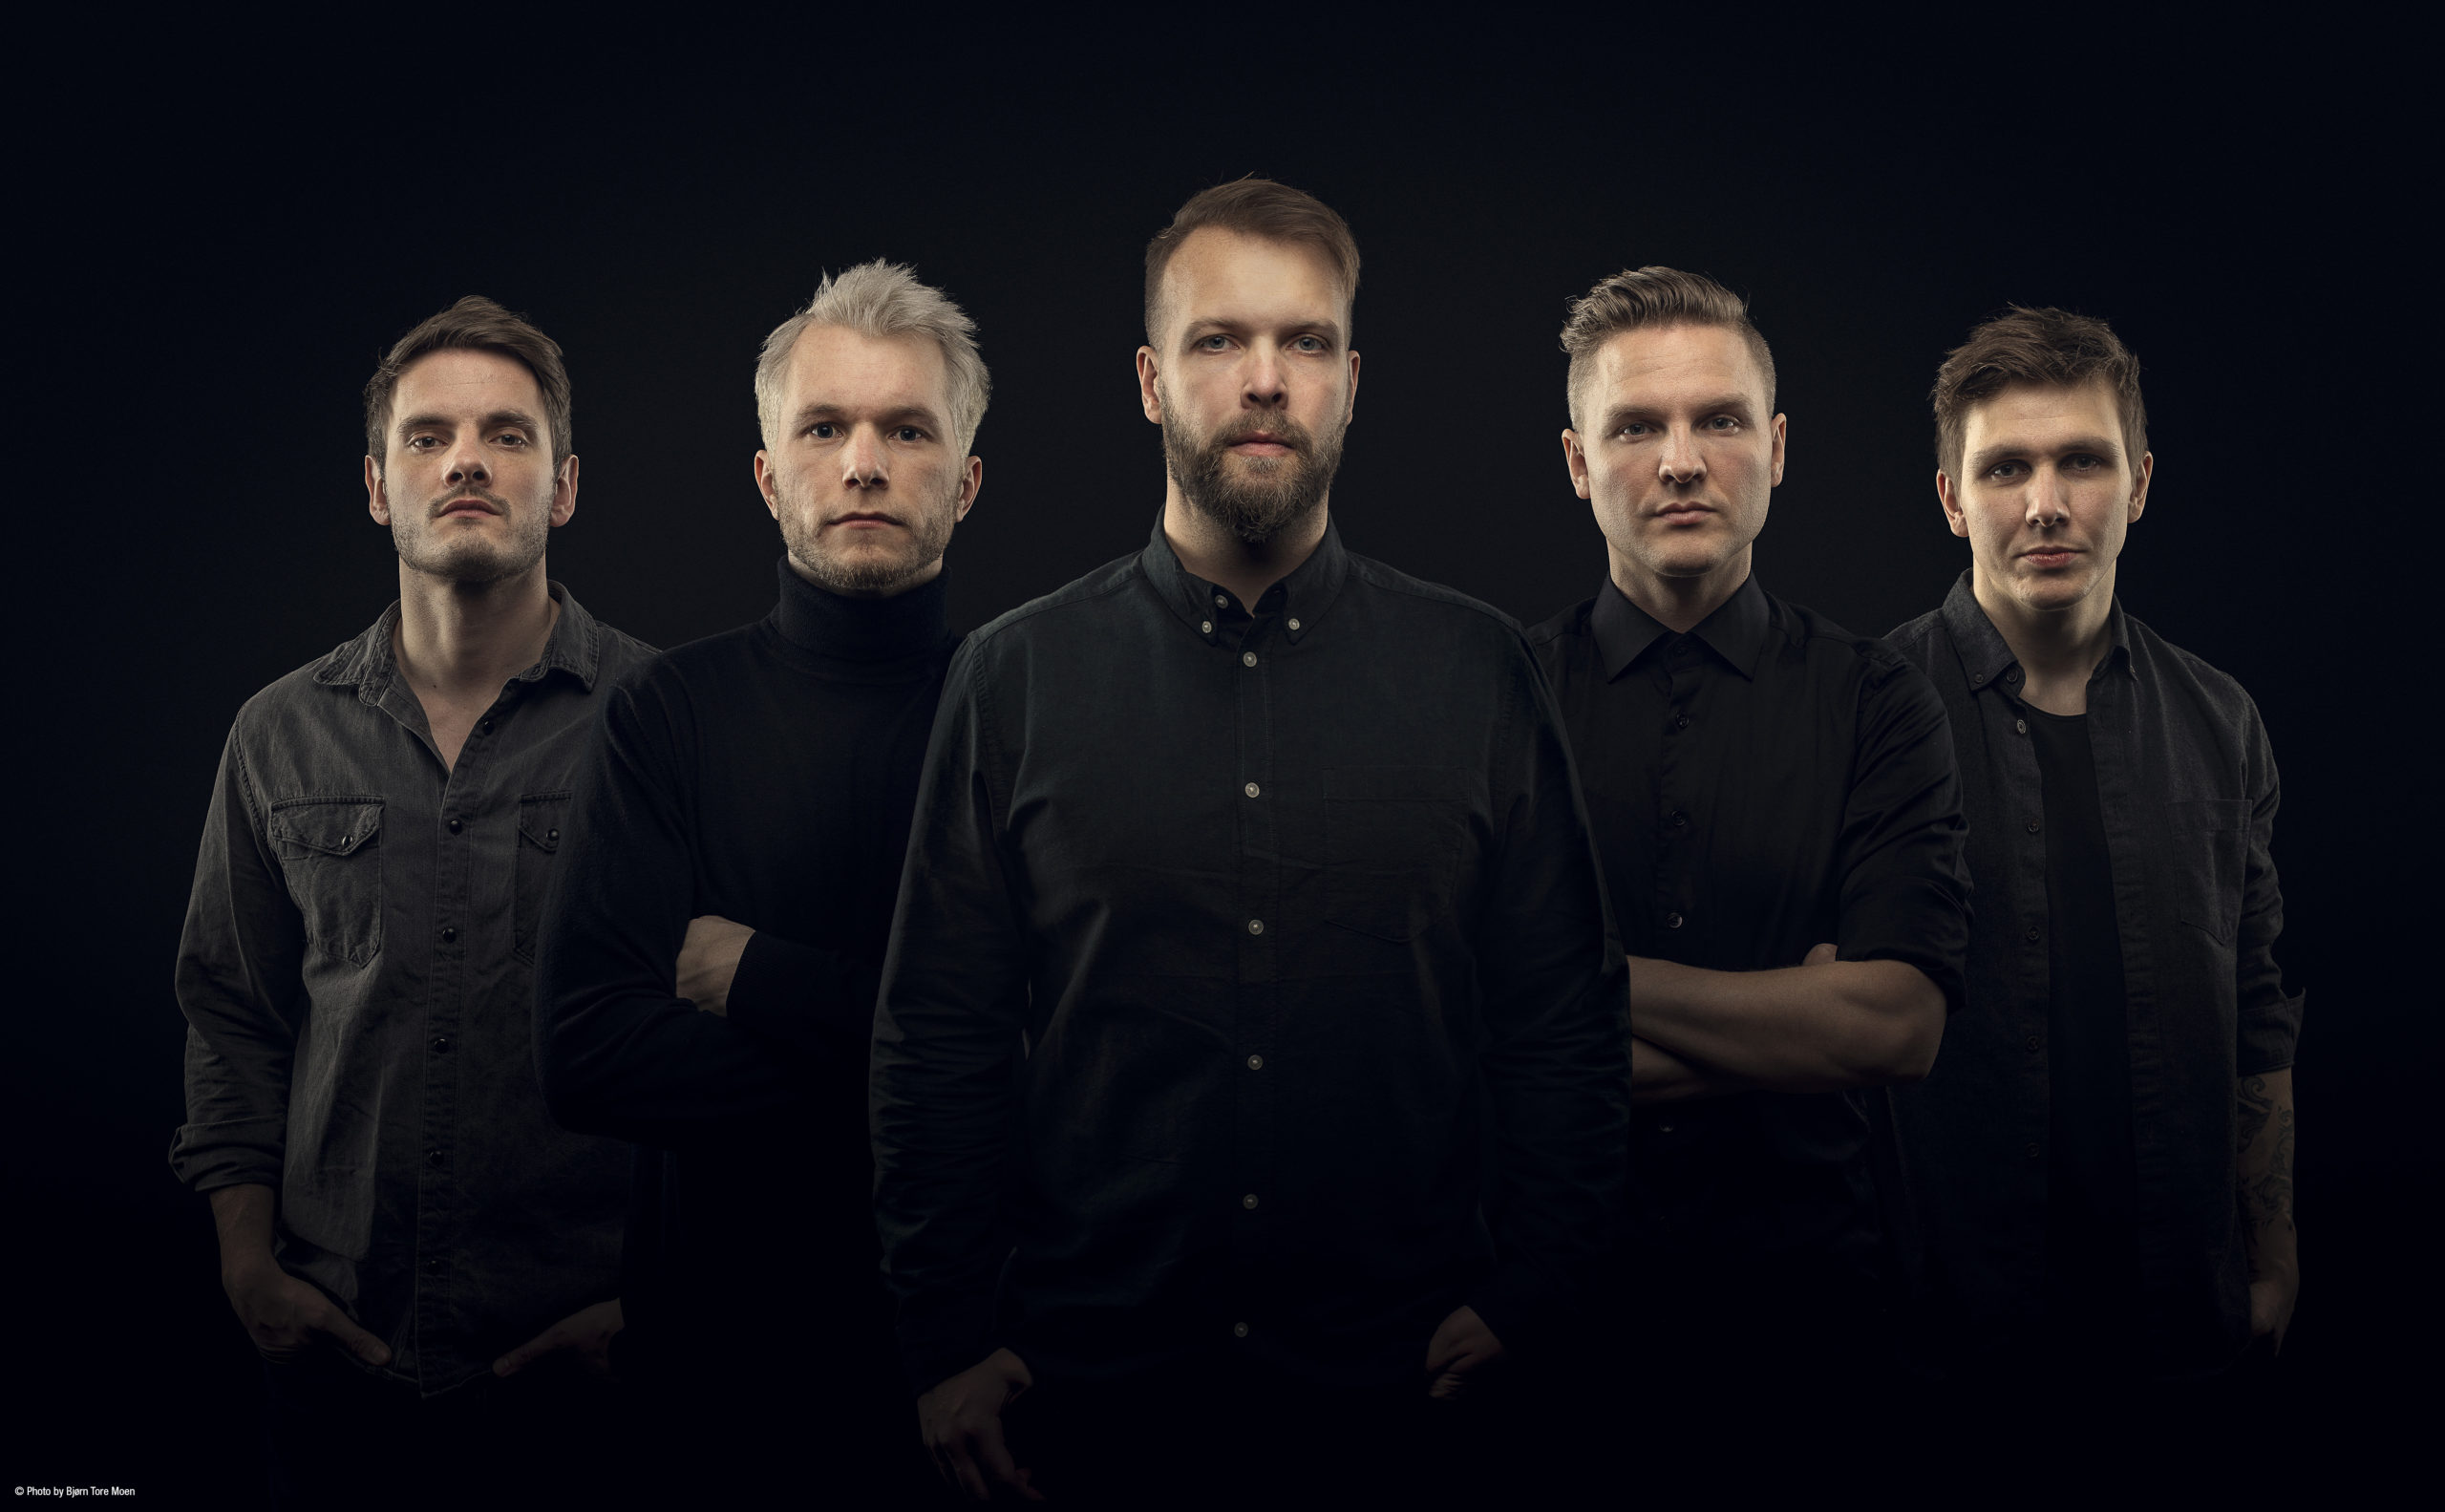 leprous-2021-insideout-music-scaled-8934404-8851909-jpg